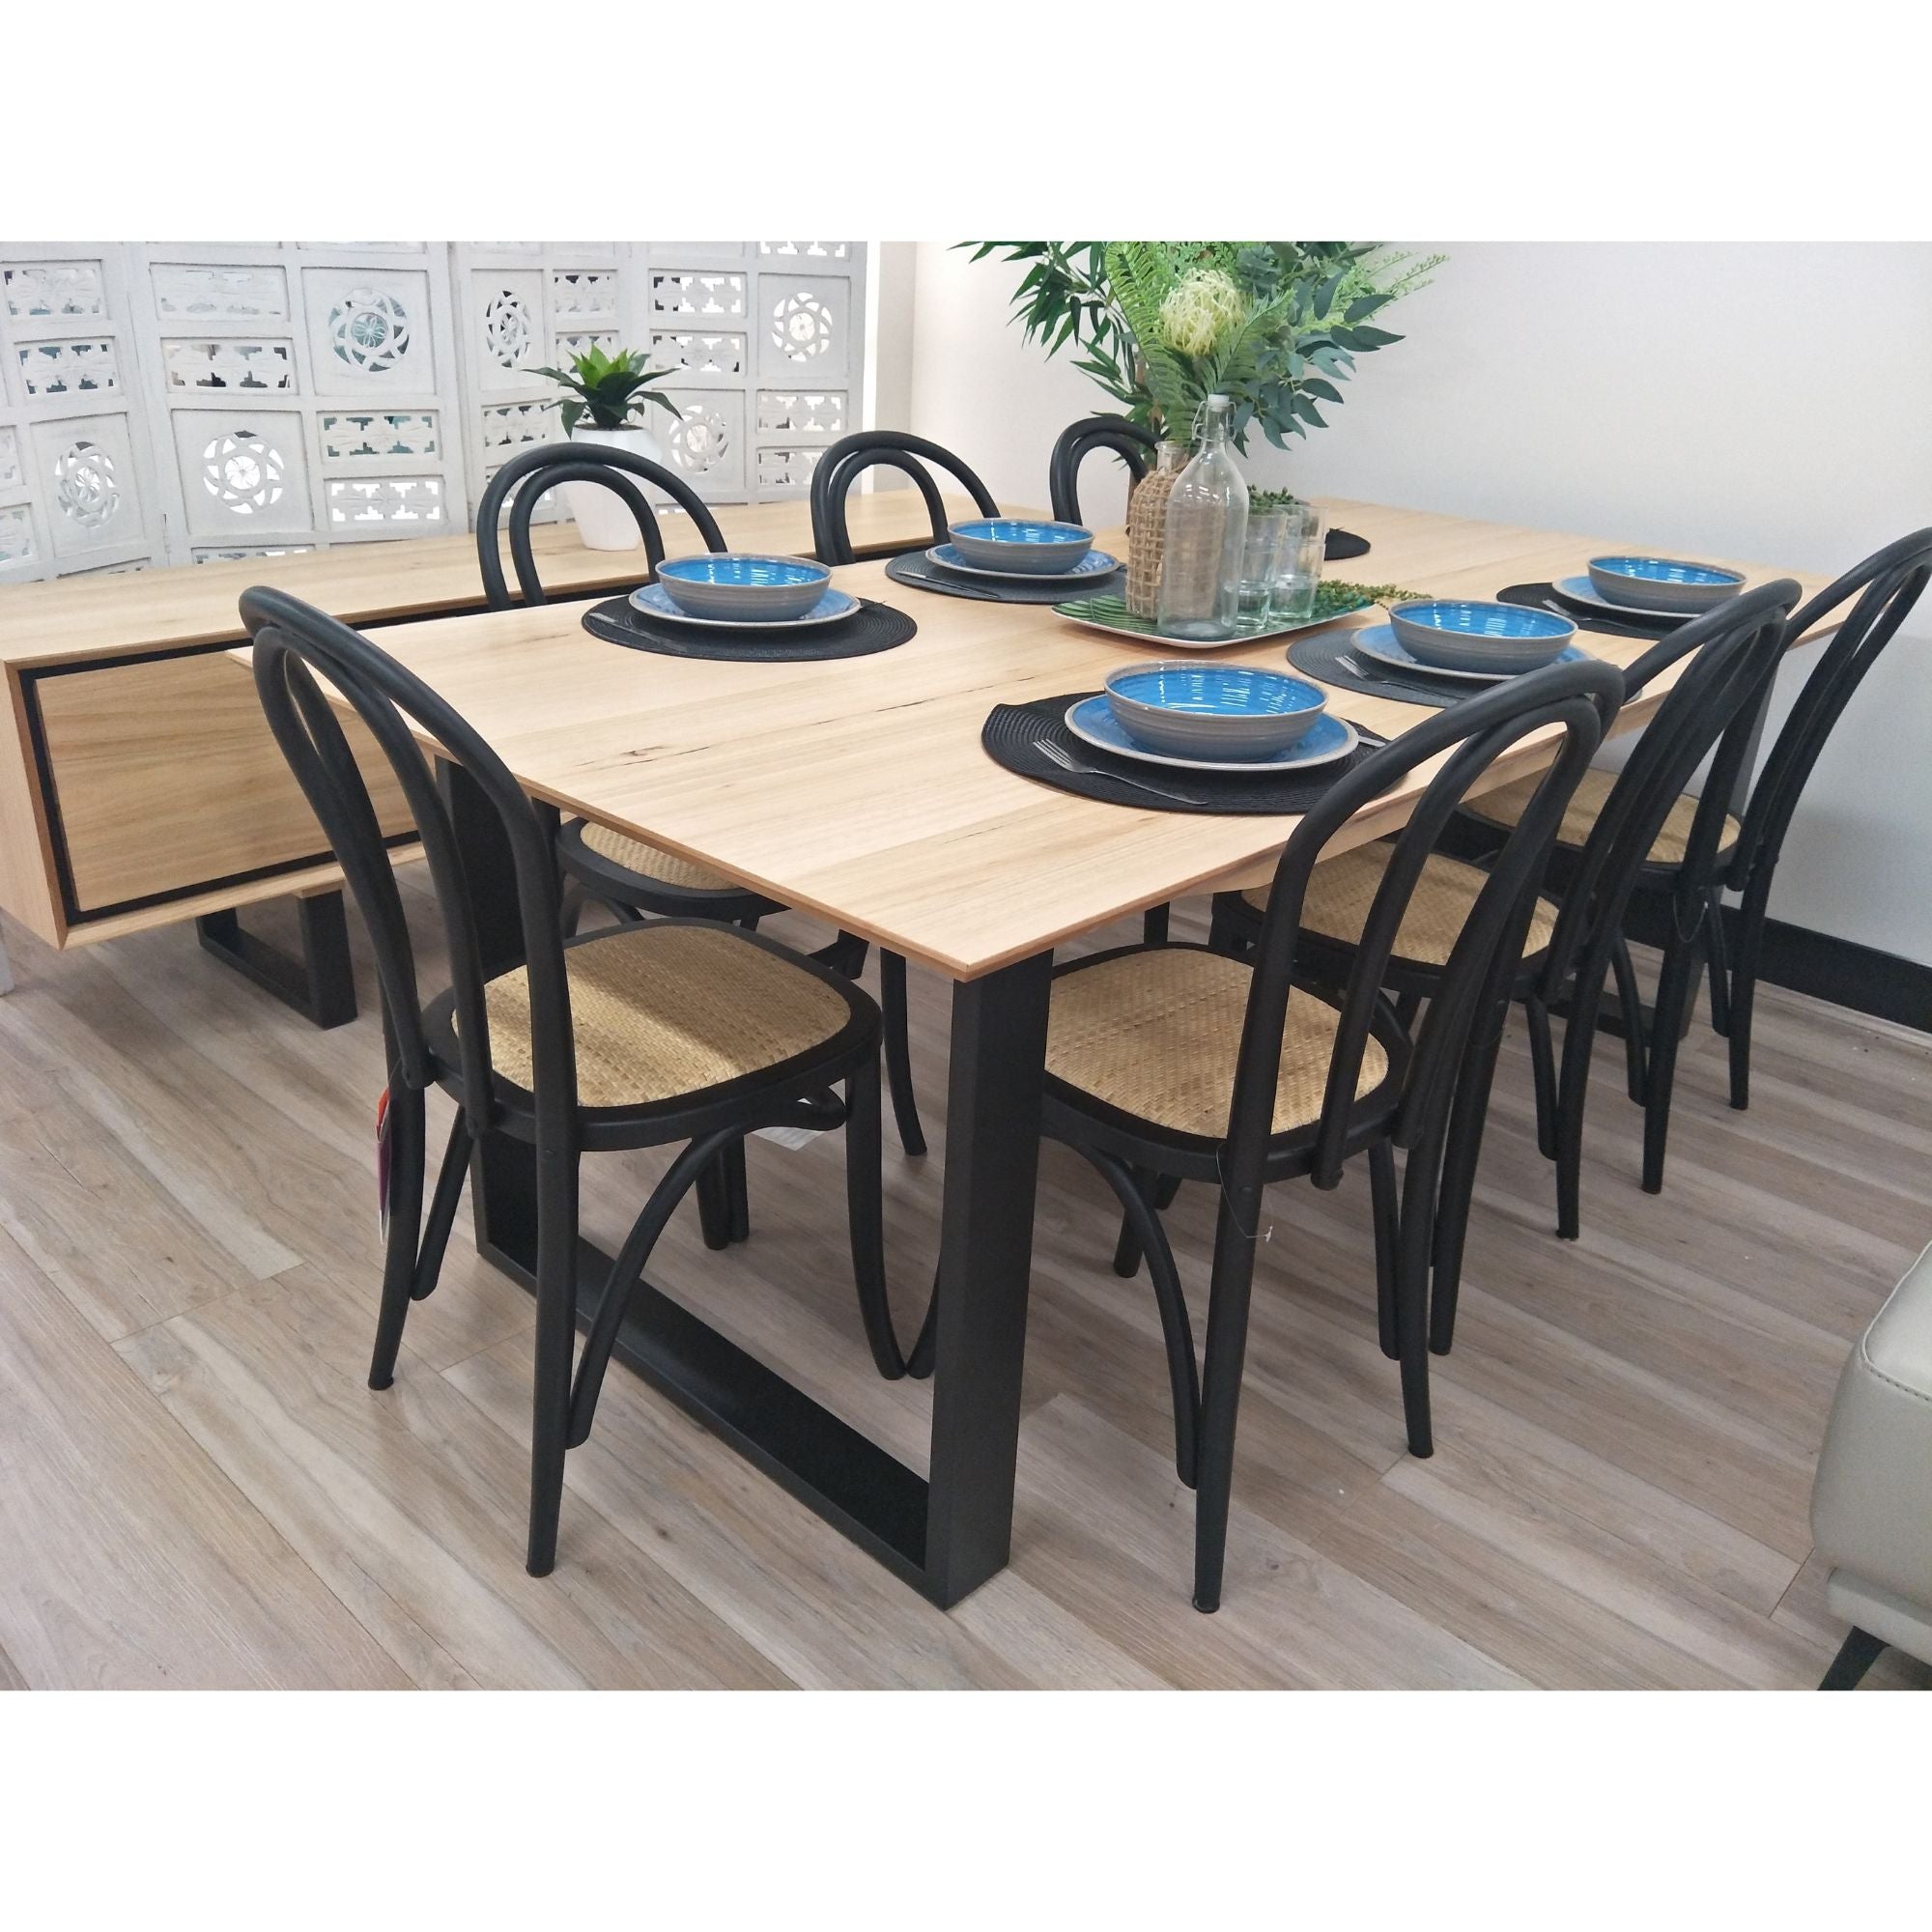 Aconite 9pc 210cm Dining Table Set 8 Arched Back Chair Solid Messmate Timber